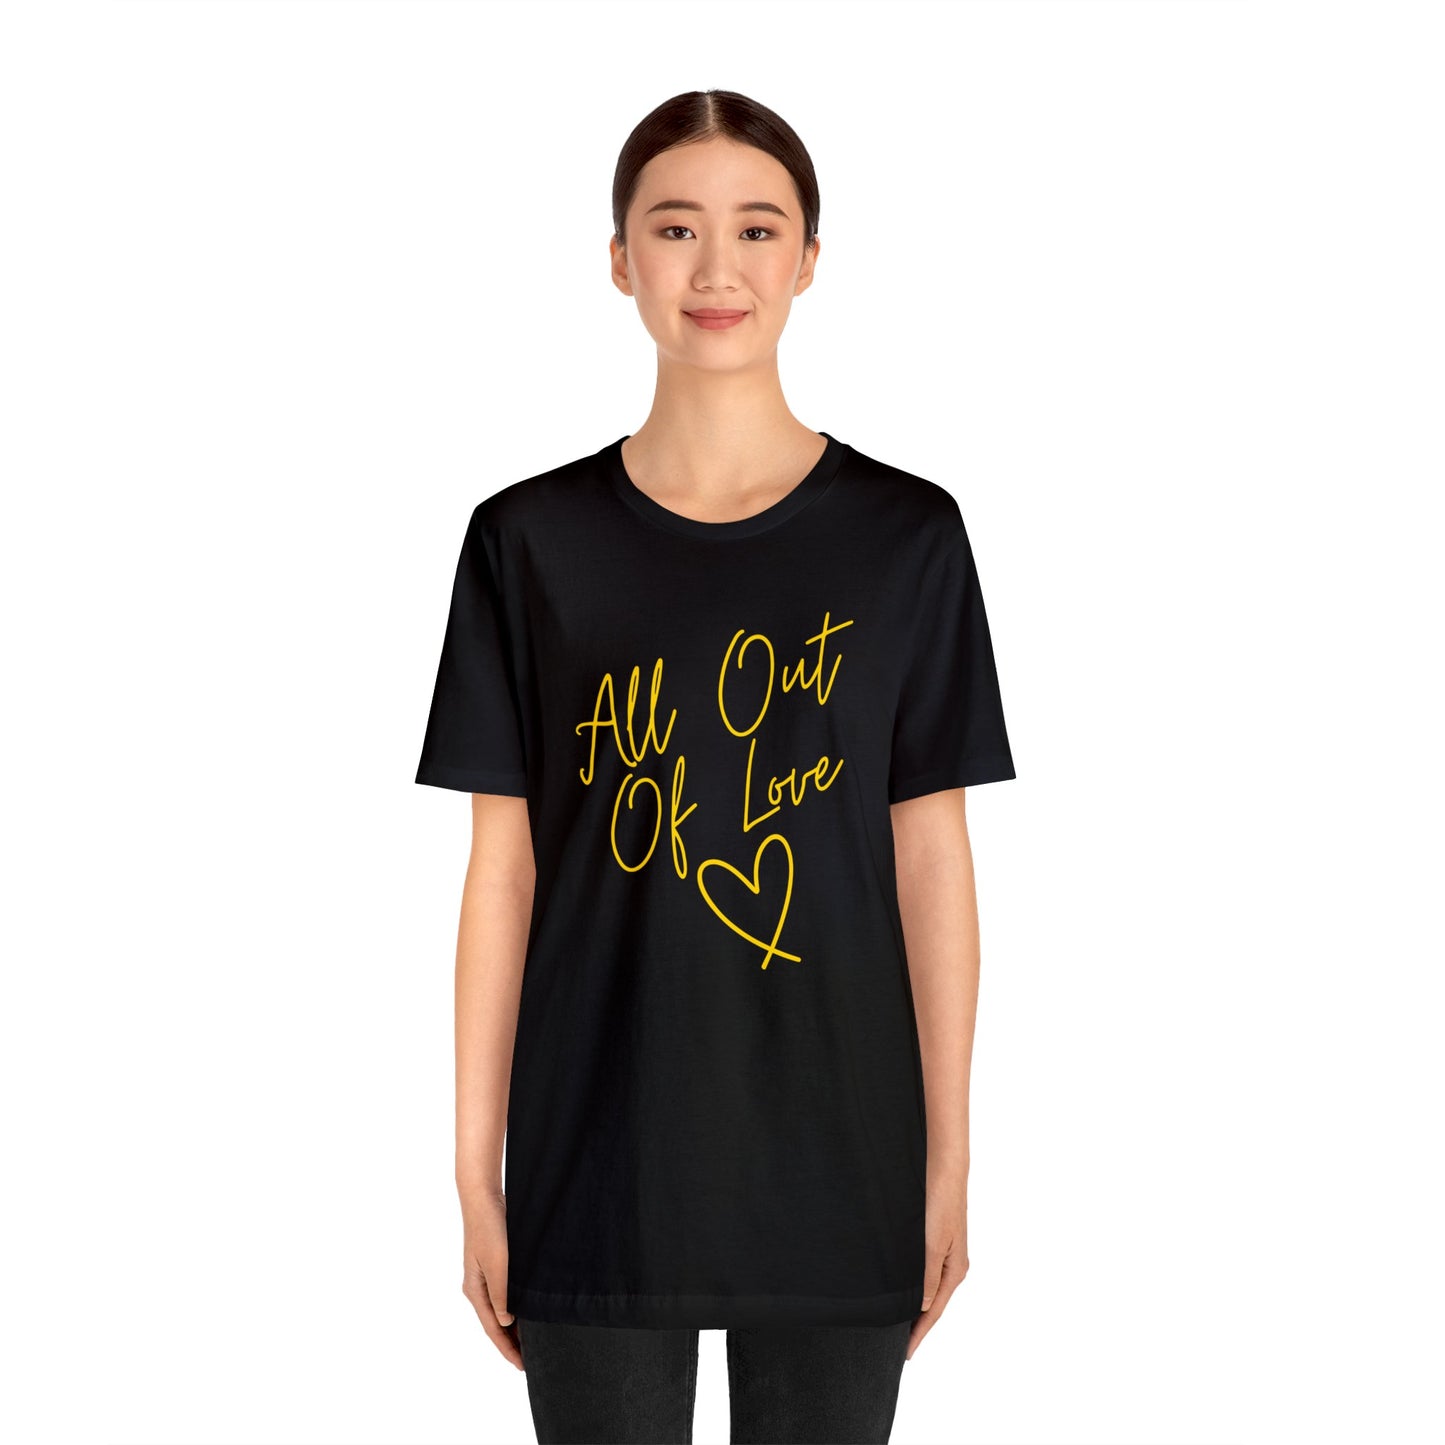 All Out Of Love Shirt